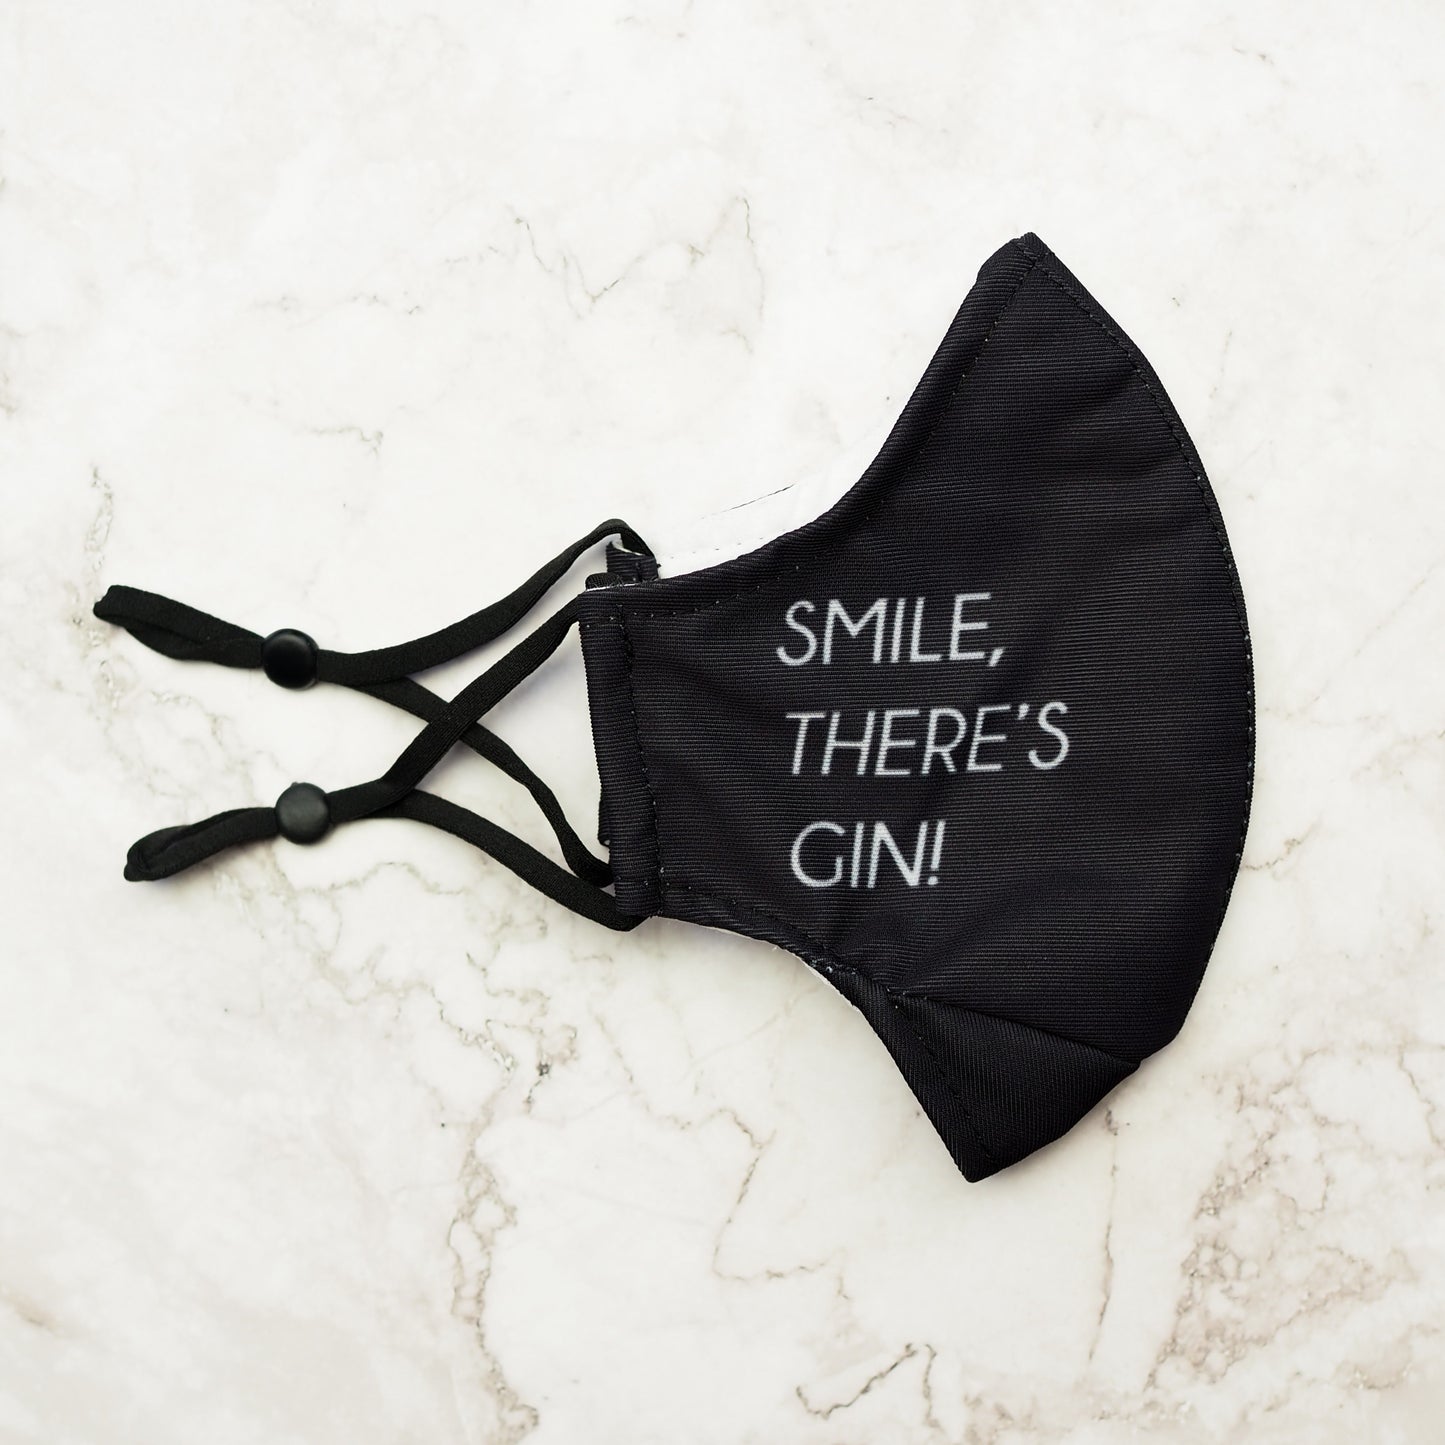 CG “Smile There’s Gin” Face Masks